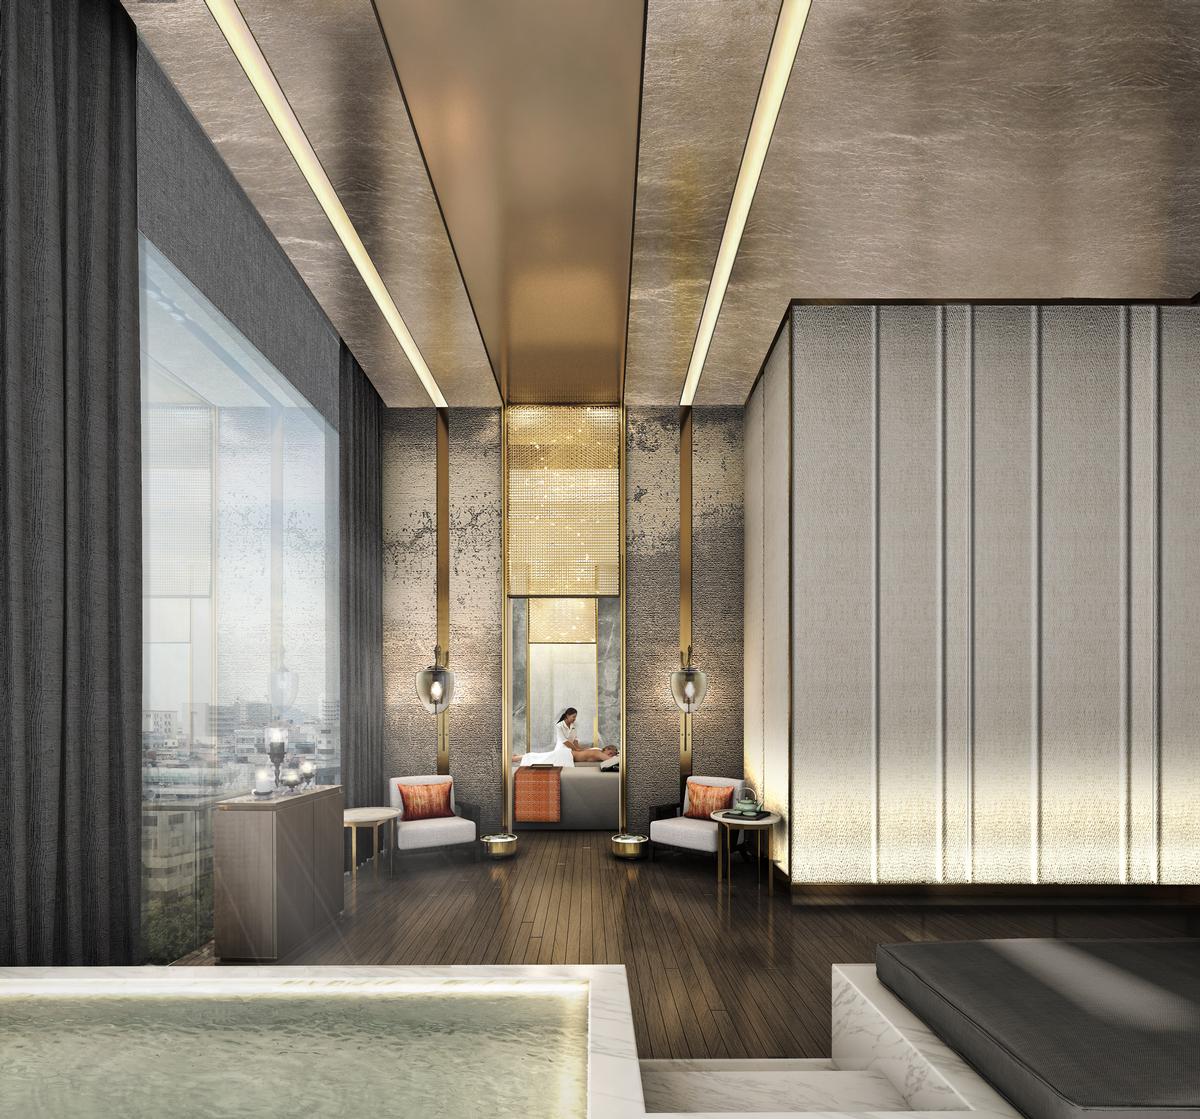 Inspired by the beauty and culture of Malaysia, the 700sq m (7,535sq ft) spa will open in 2020